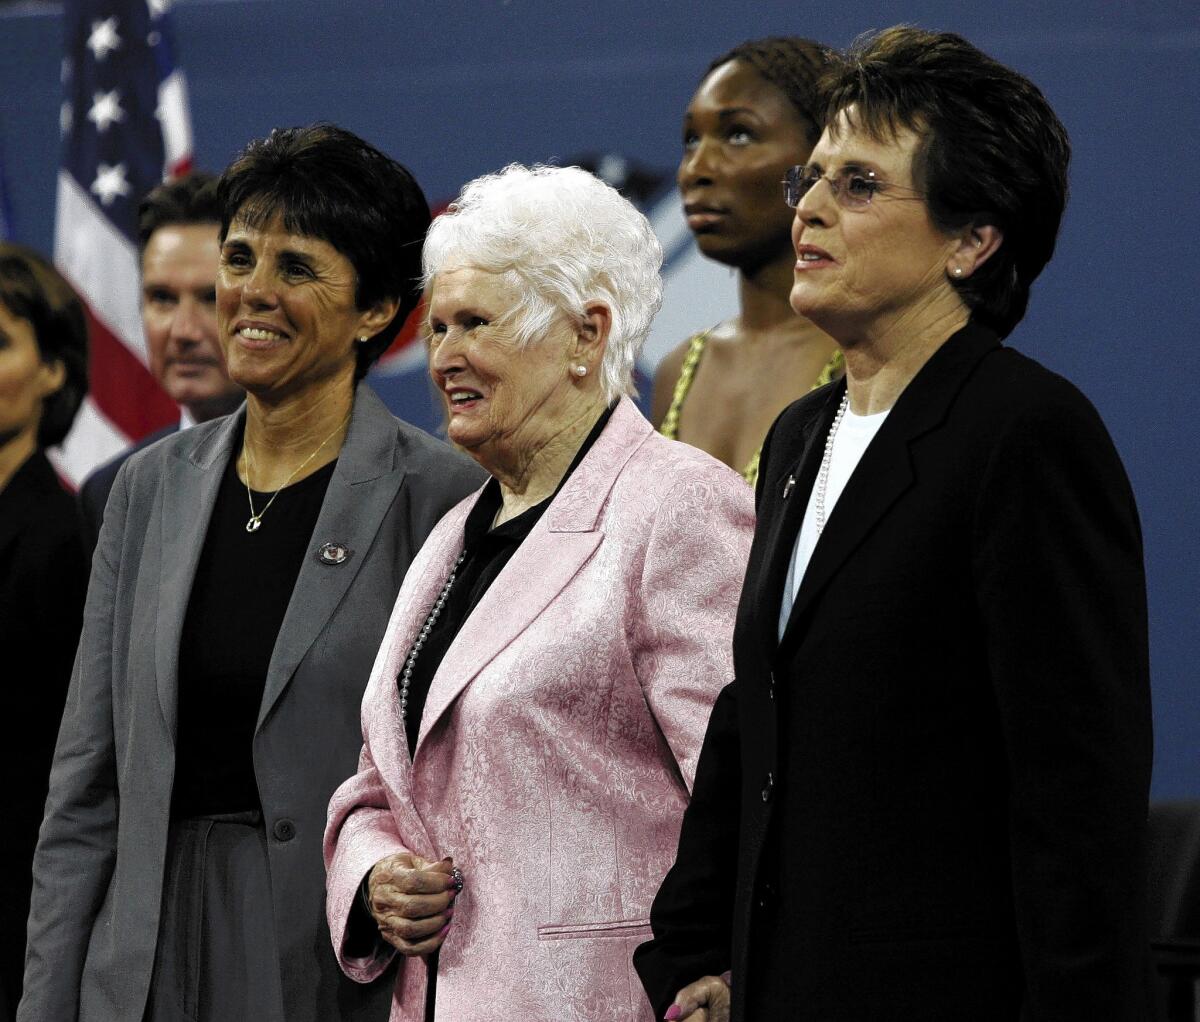 Billie Jean King, right, stands with her mother, Betty Moffitt, center, and Ilana Kloss, left. King has said her mother helped her remain balanced as a child.